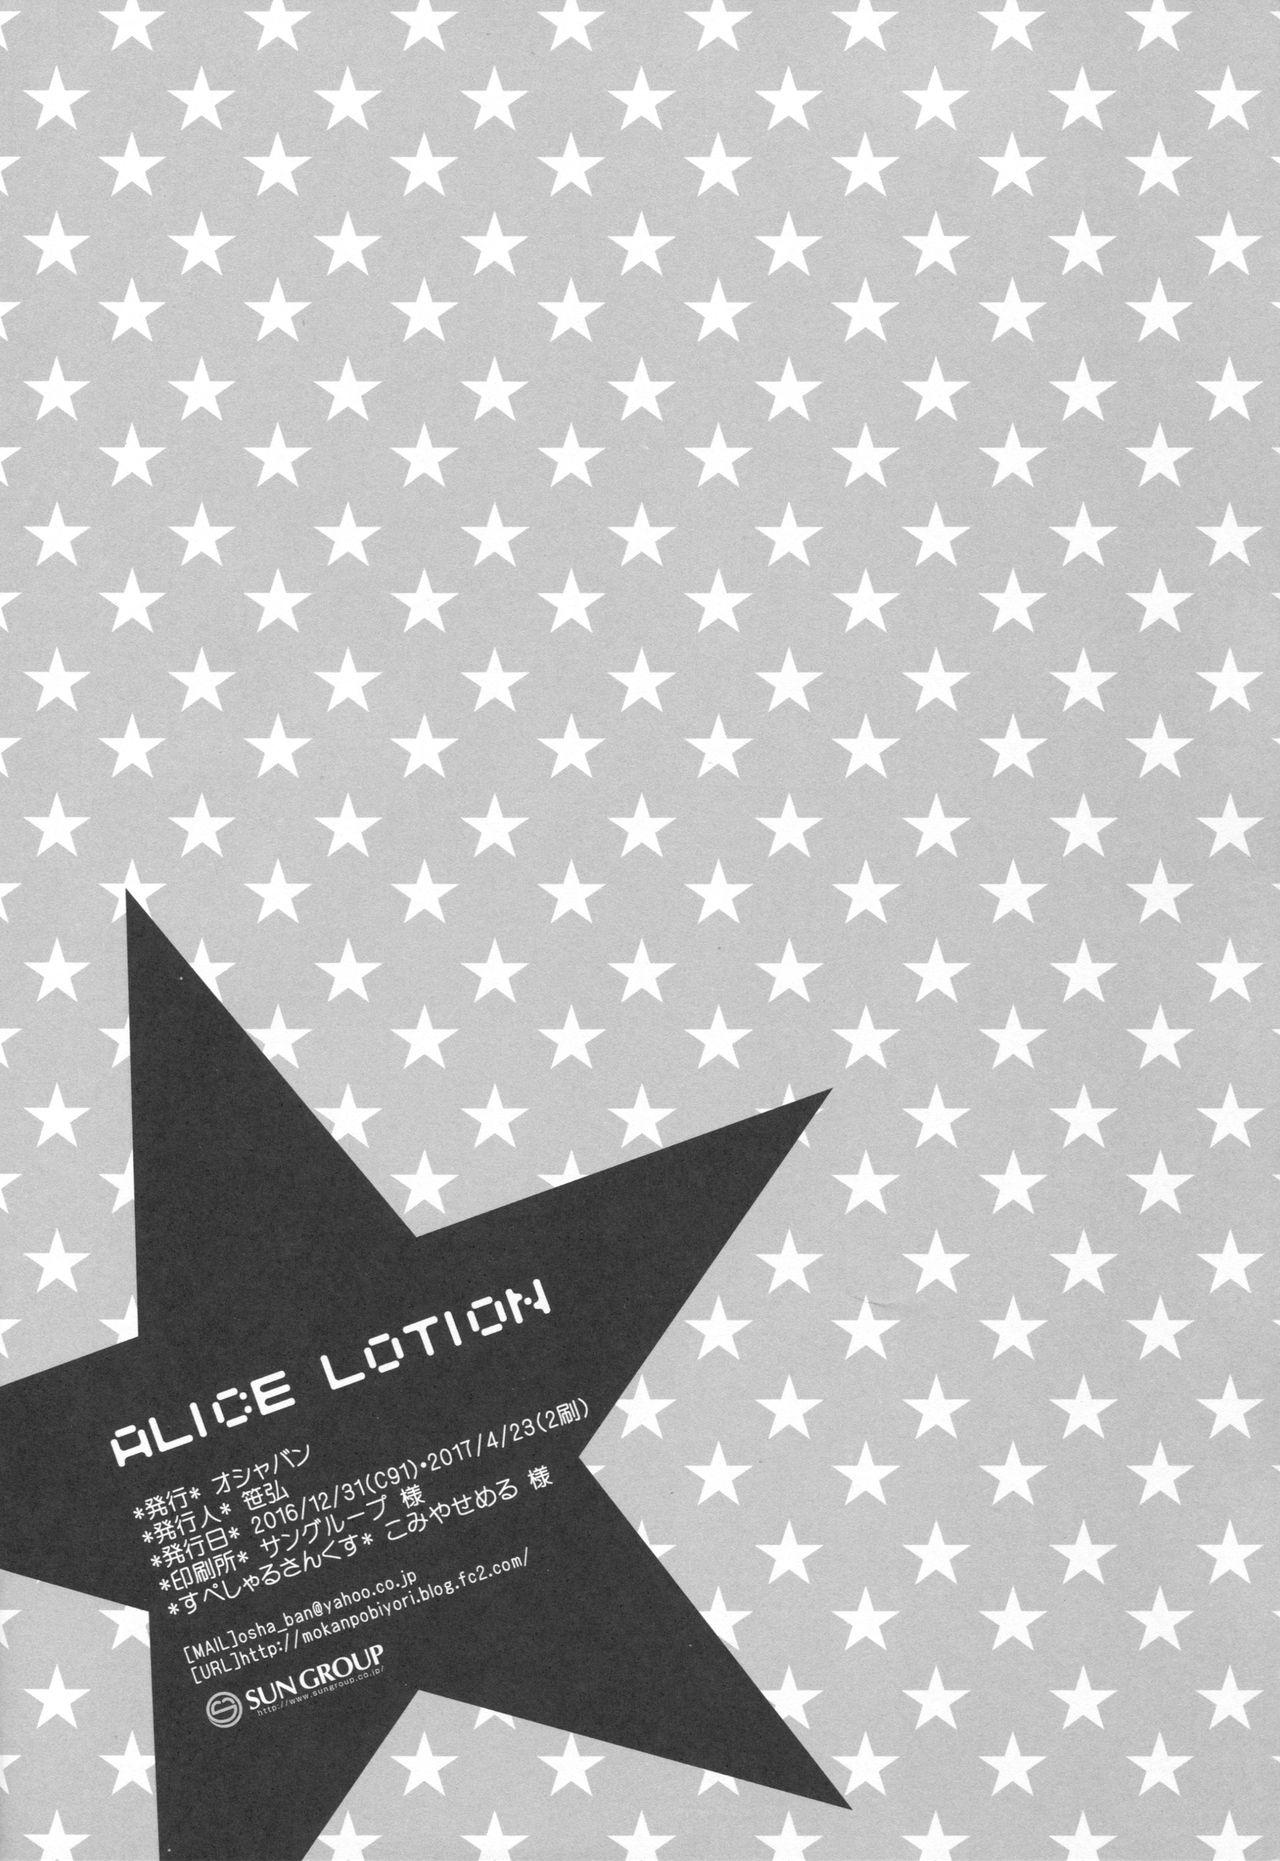 ALICE LOTION 12